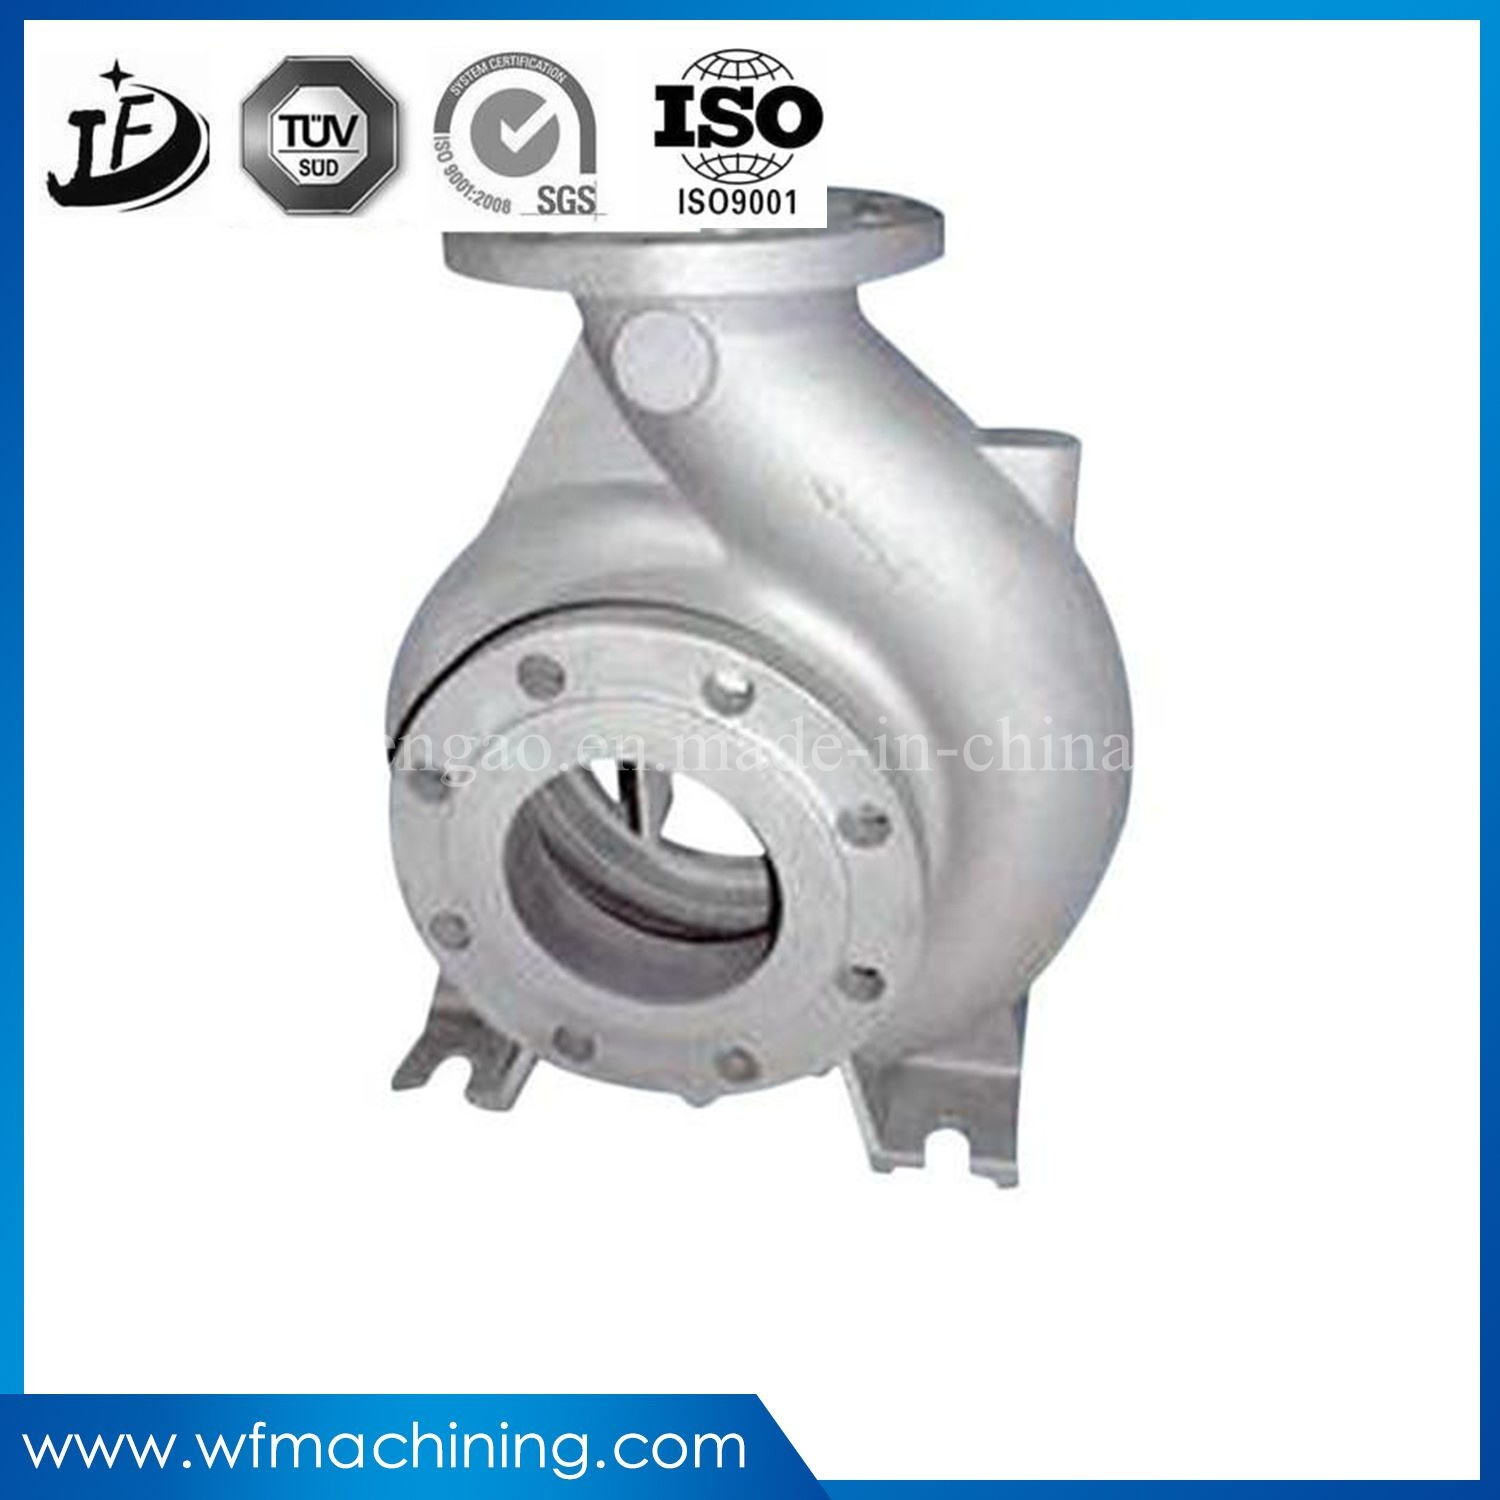 OEM Customized Sand Casting Hardware for Industry Supplies